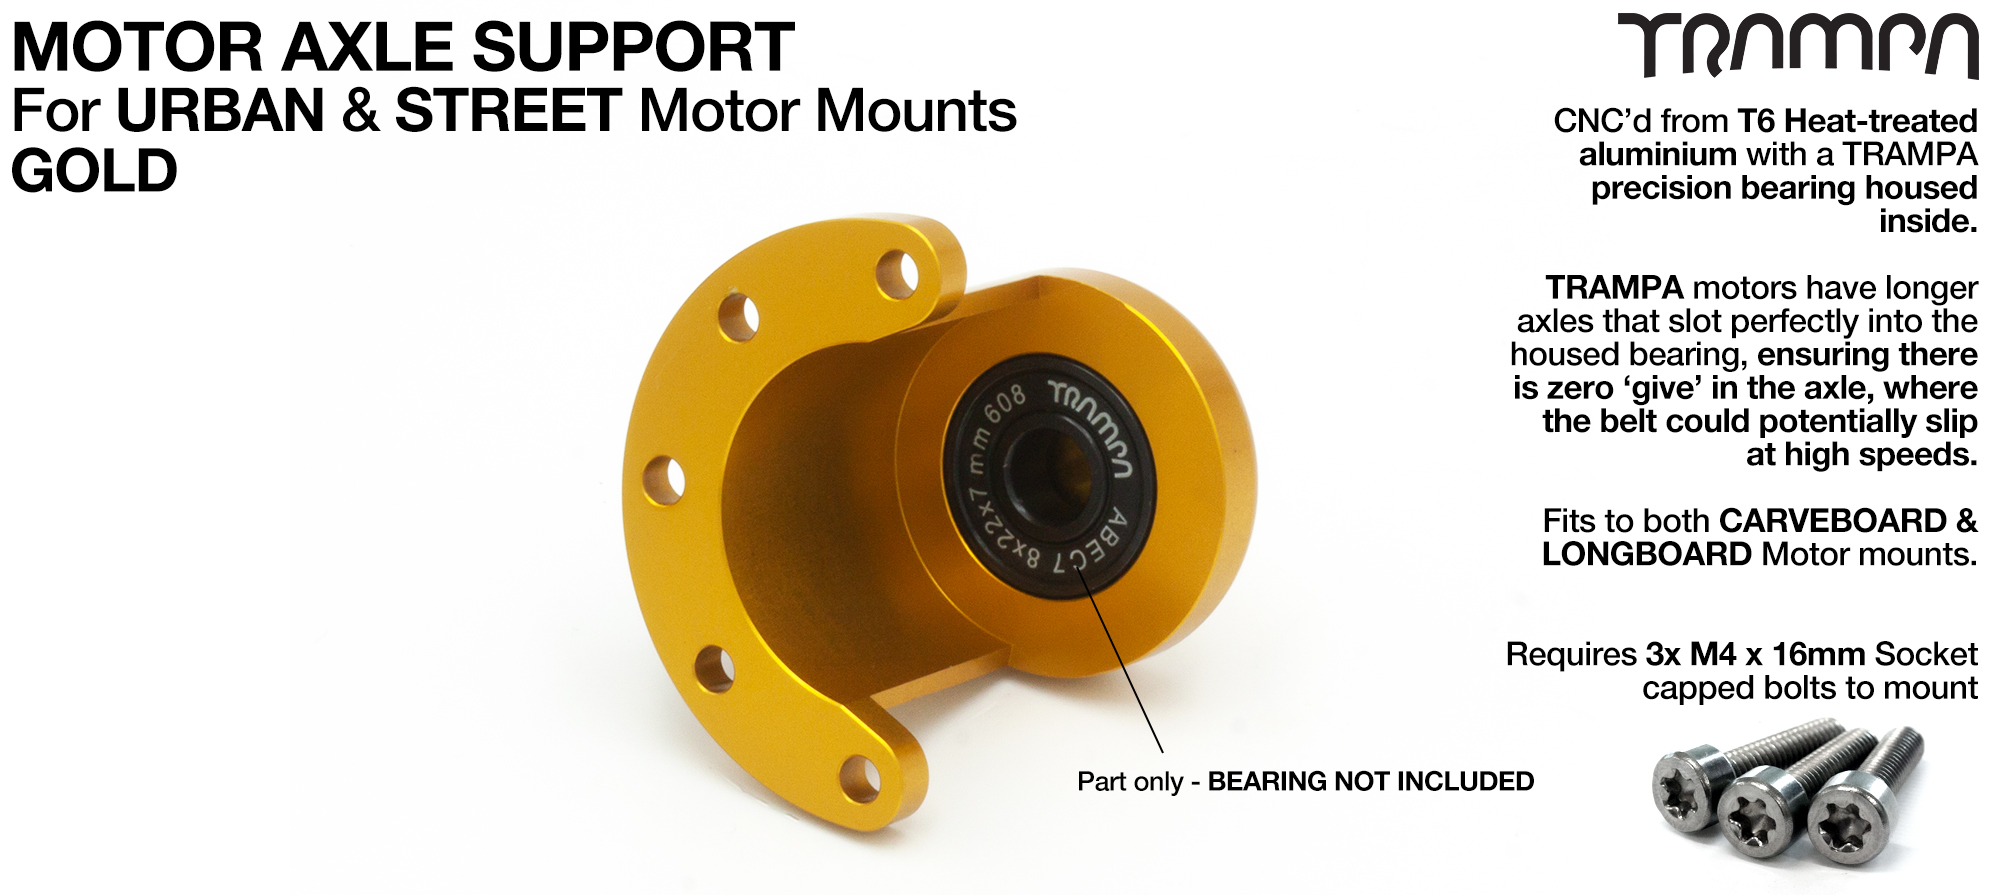 Motor Axle Support for Spring Truck Motor Mounts UNIVERSAL - GOLD